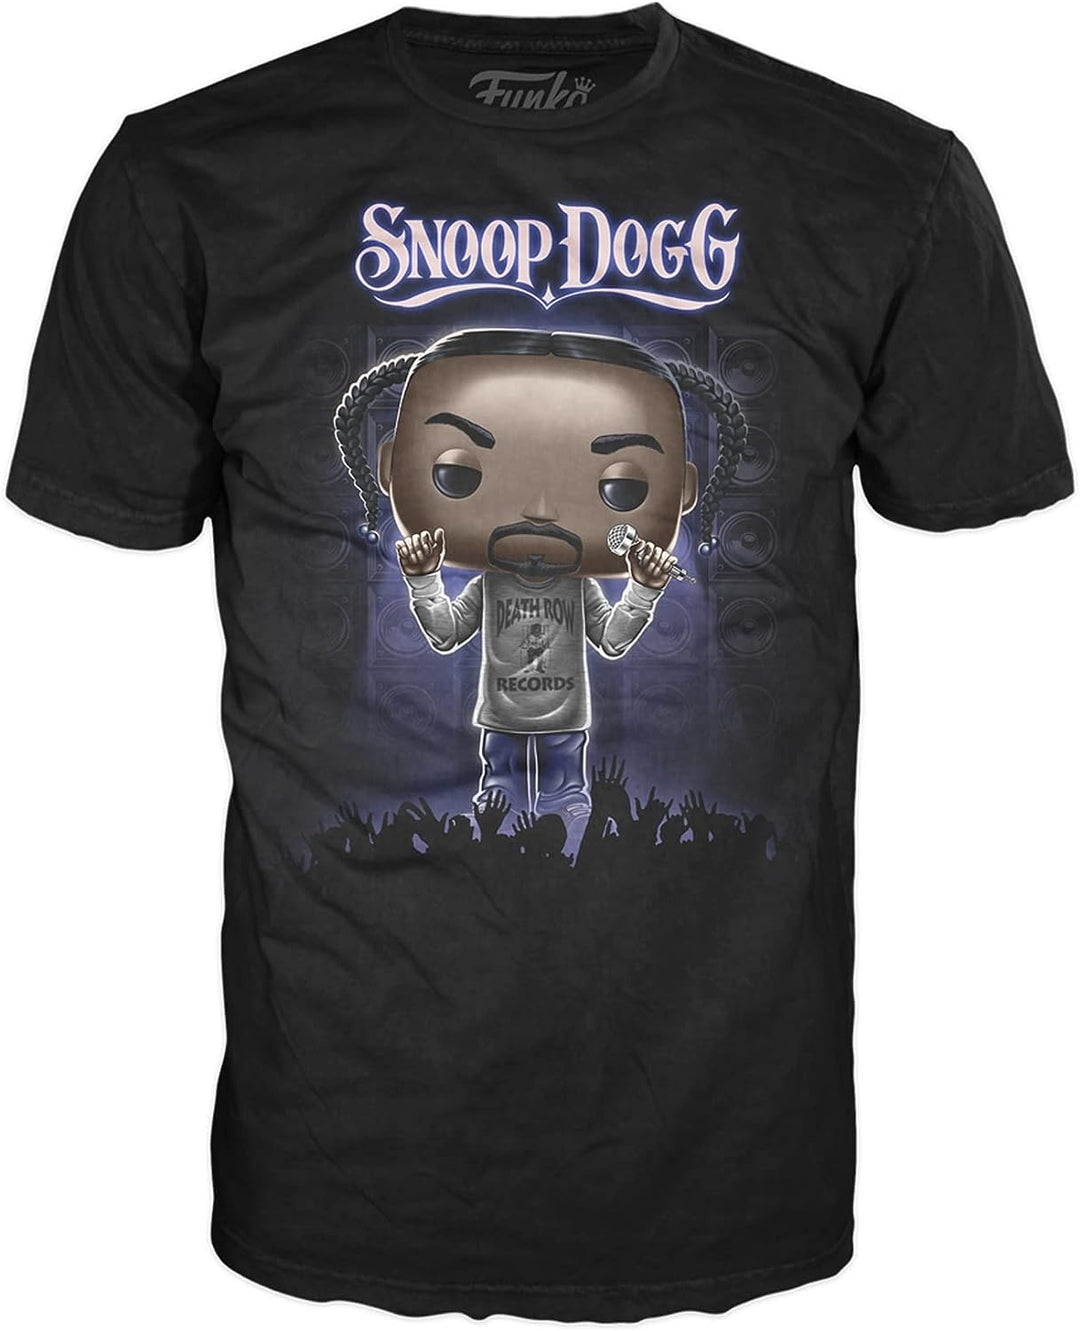 Funko Boxed Tee: Snoop Doggy Dogg - Large - (L) - T-Shirt - Clothes - Gift Idea - Short Sleeve Top for Adults Unisex Men and Women